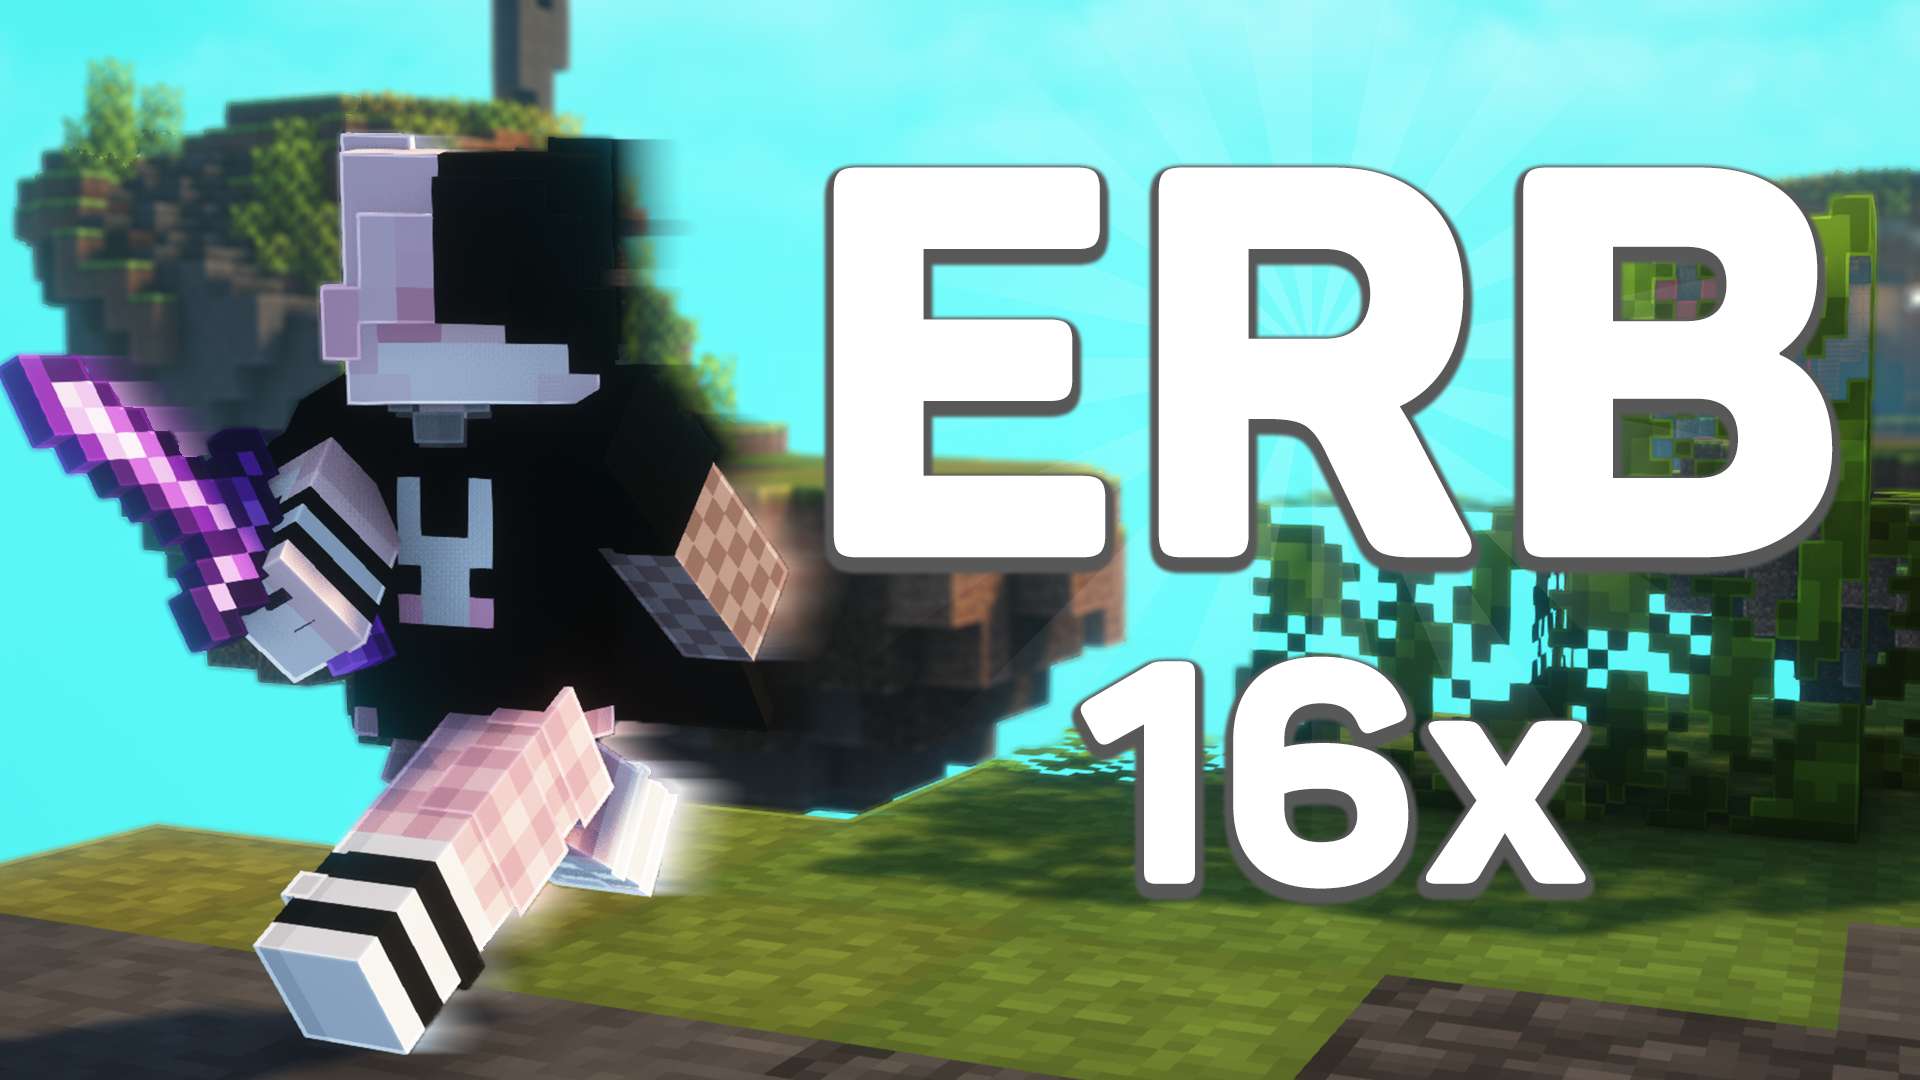 ERB  16 by 5erb_ on PvPRP